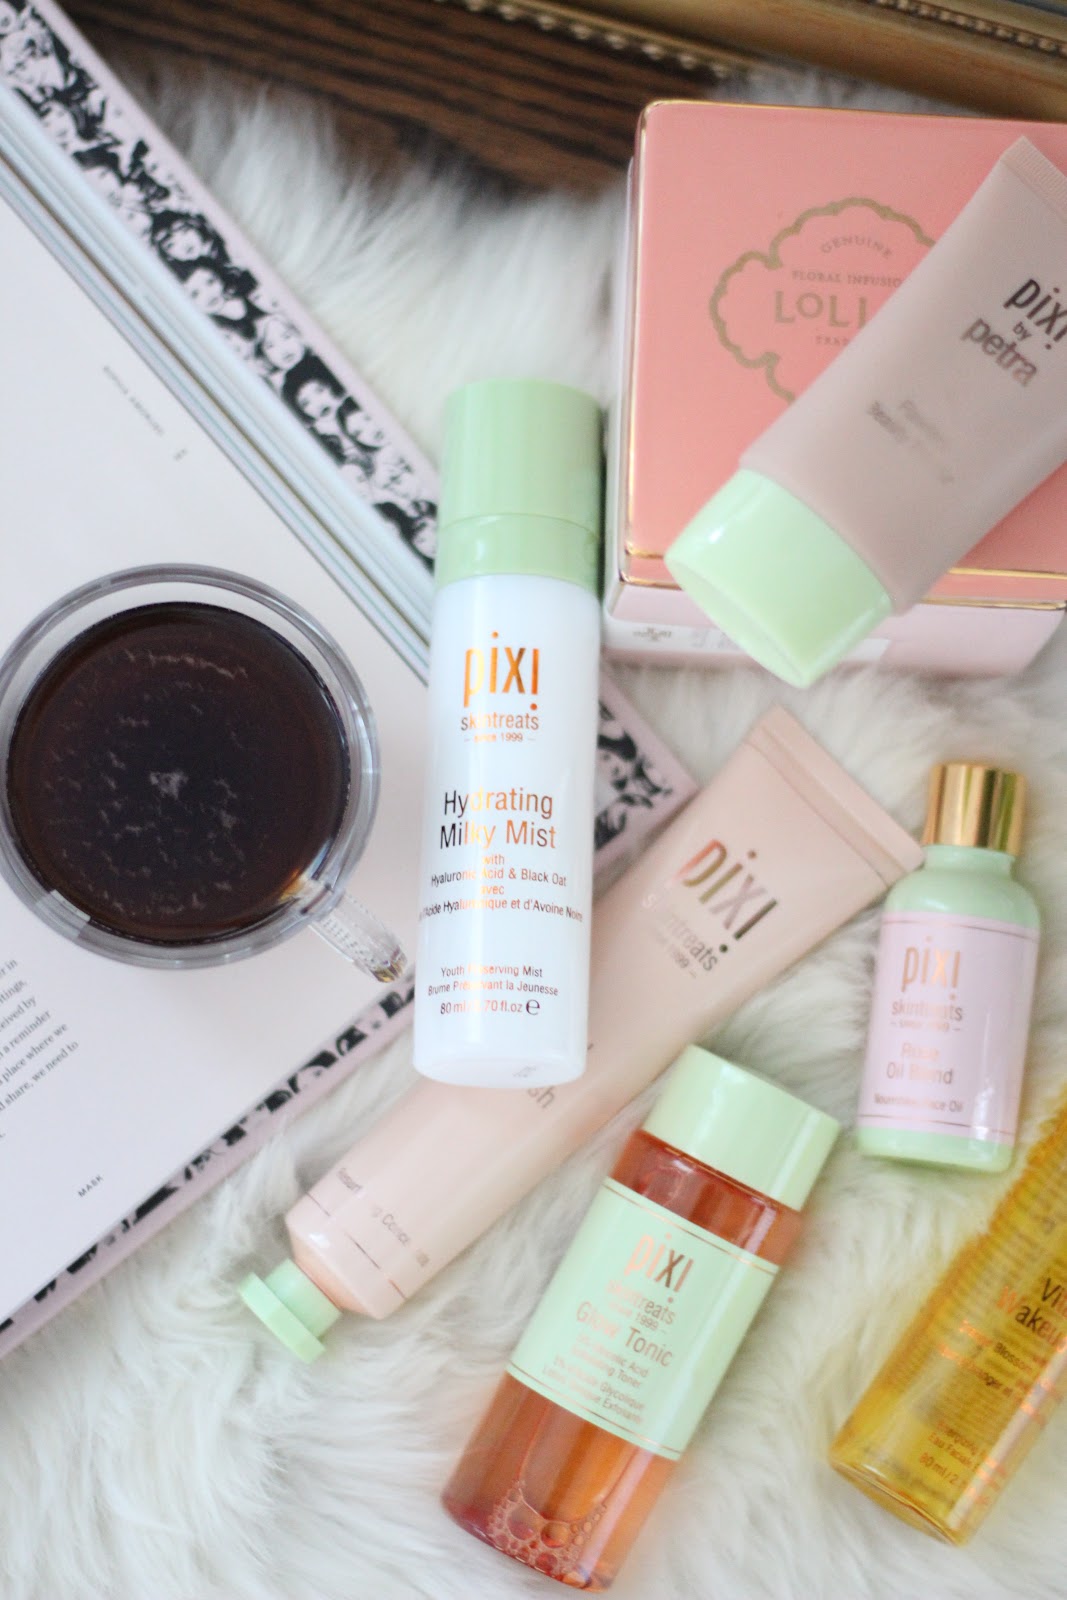 Pixi Beauty Review: Glow Tonic Hydrating Milky Mist Flawless Beauty Primer mixed with Rose Oil Blend Vitamin Wake Up Mist Endlessly Silky Eye Pen- Bronzebeam Beauty Bronzer- Summertime